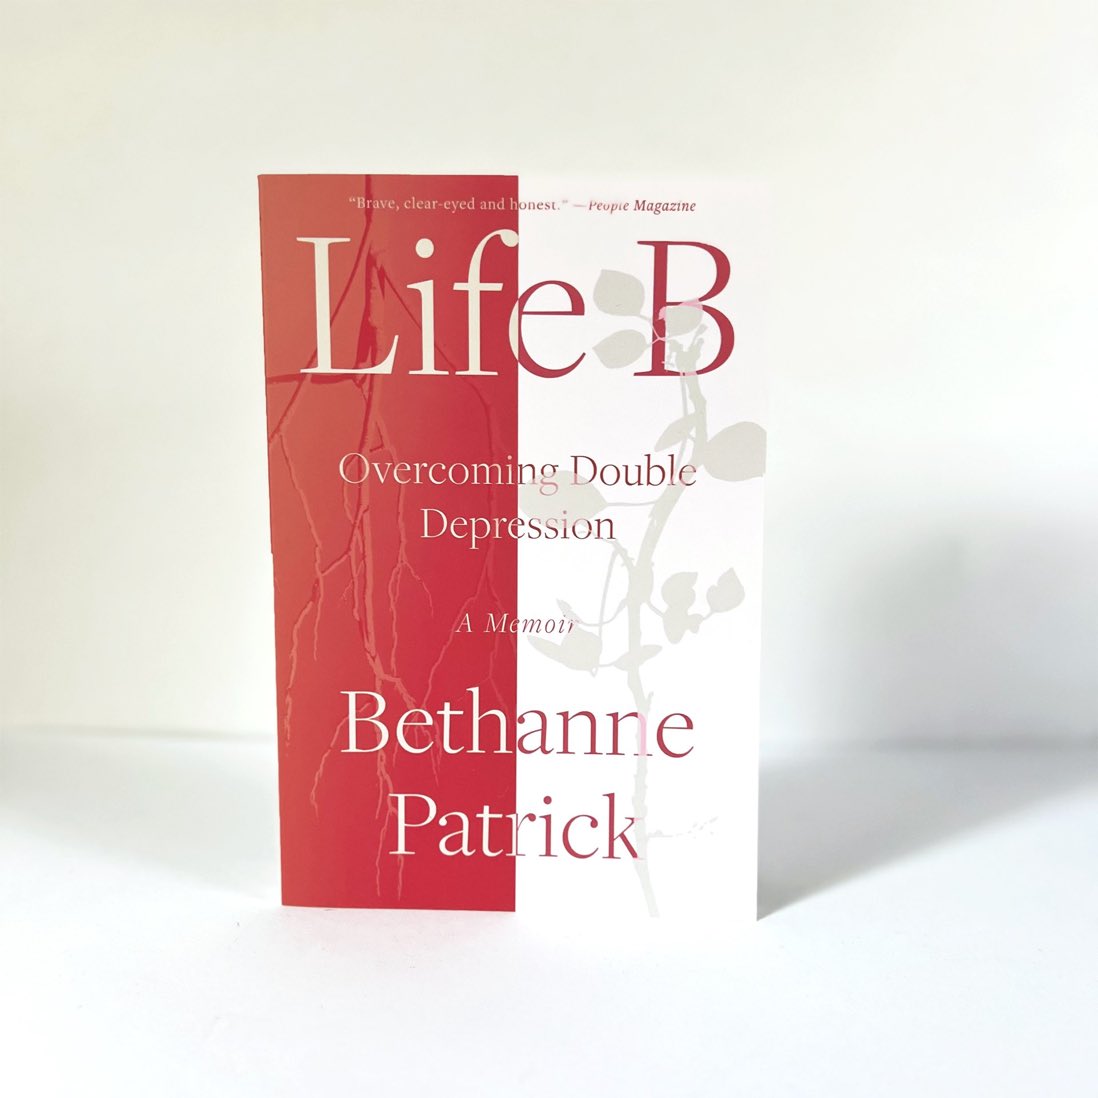 My memoir LIFE B is out in paperback today. Huge thanks to @CounterpointLLC @JennieDunhamLit @DanSmetanka and the many others who have supported it, and me, as my story reaches its audience. Buy it here if you are so inclined! bookshop.org/p/books/life-b…